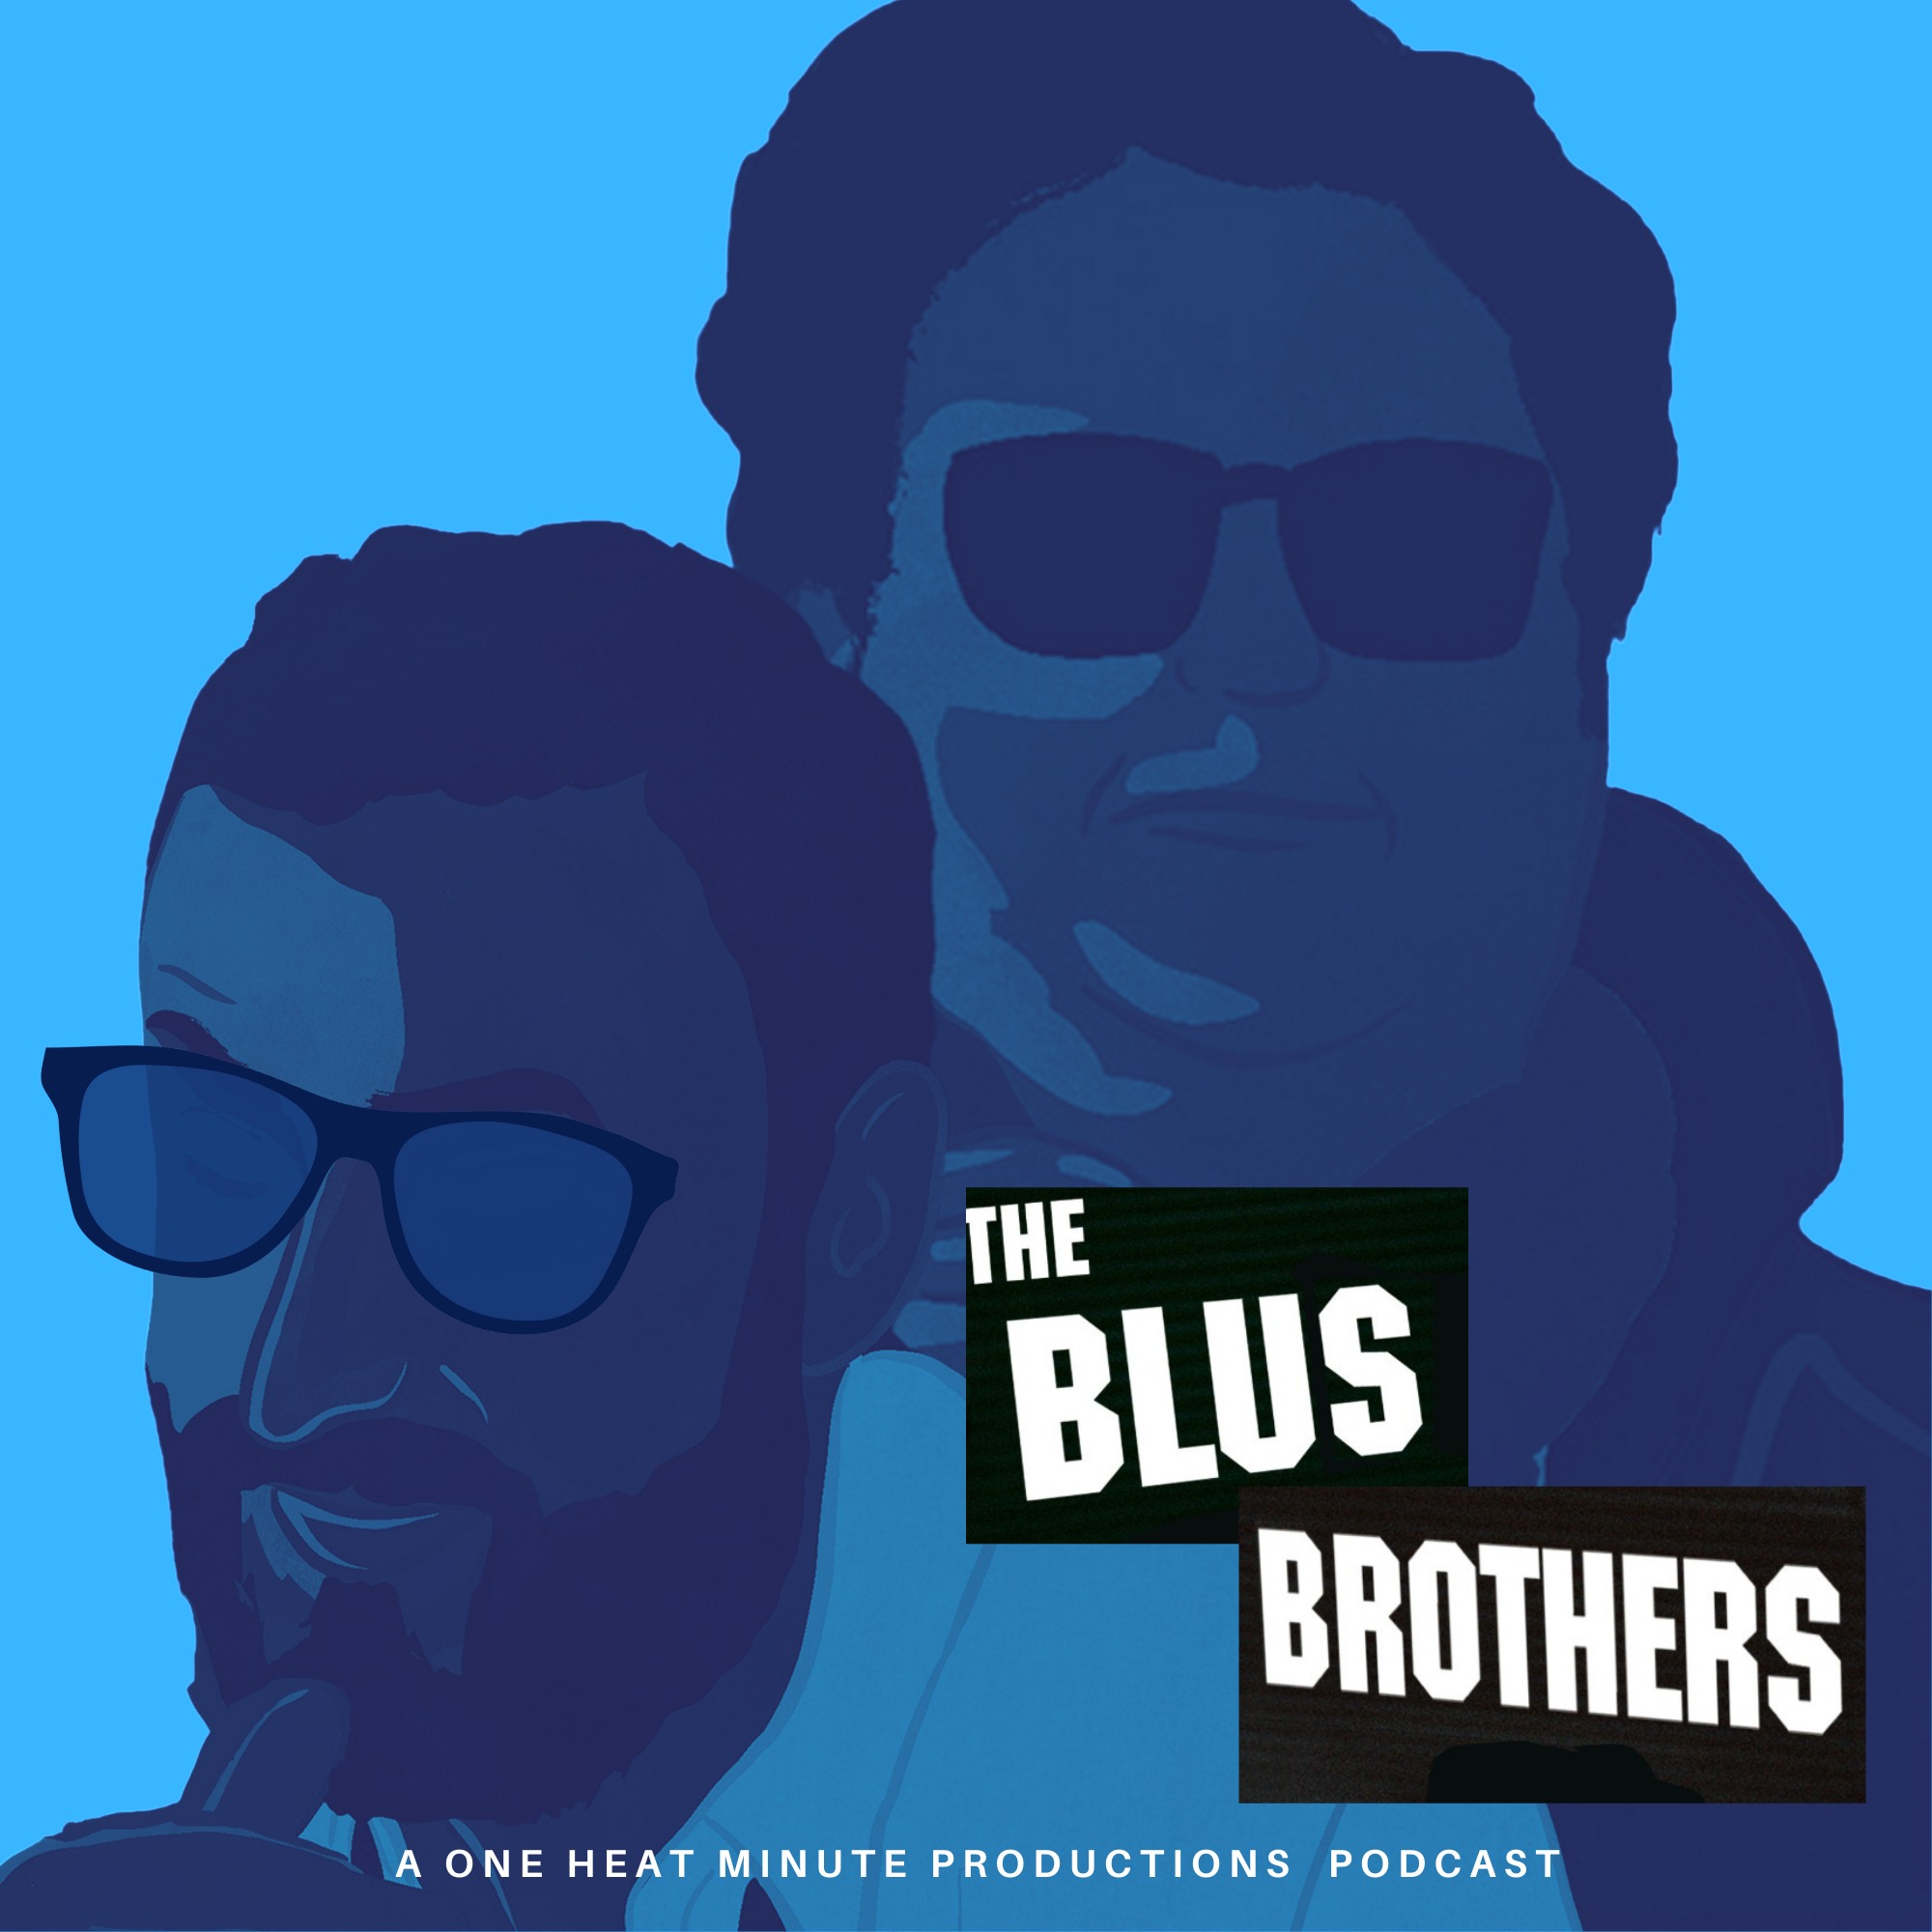 THE BLUS BROTHERS: IMPRINT FILMS - THE BOUNTY + MALENA + DAMAGE + MY SUMMER OF LOVE